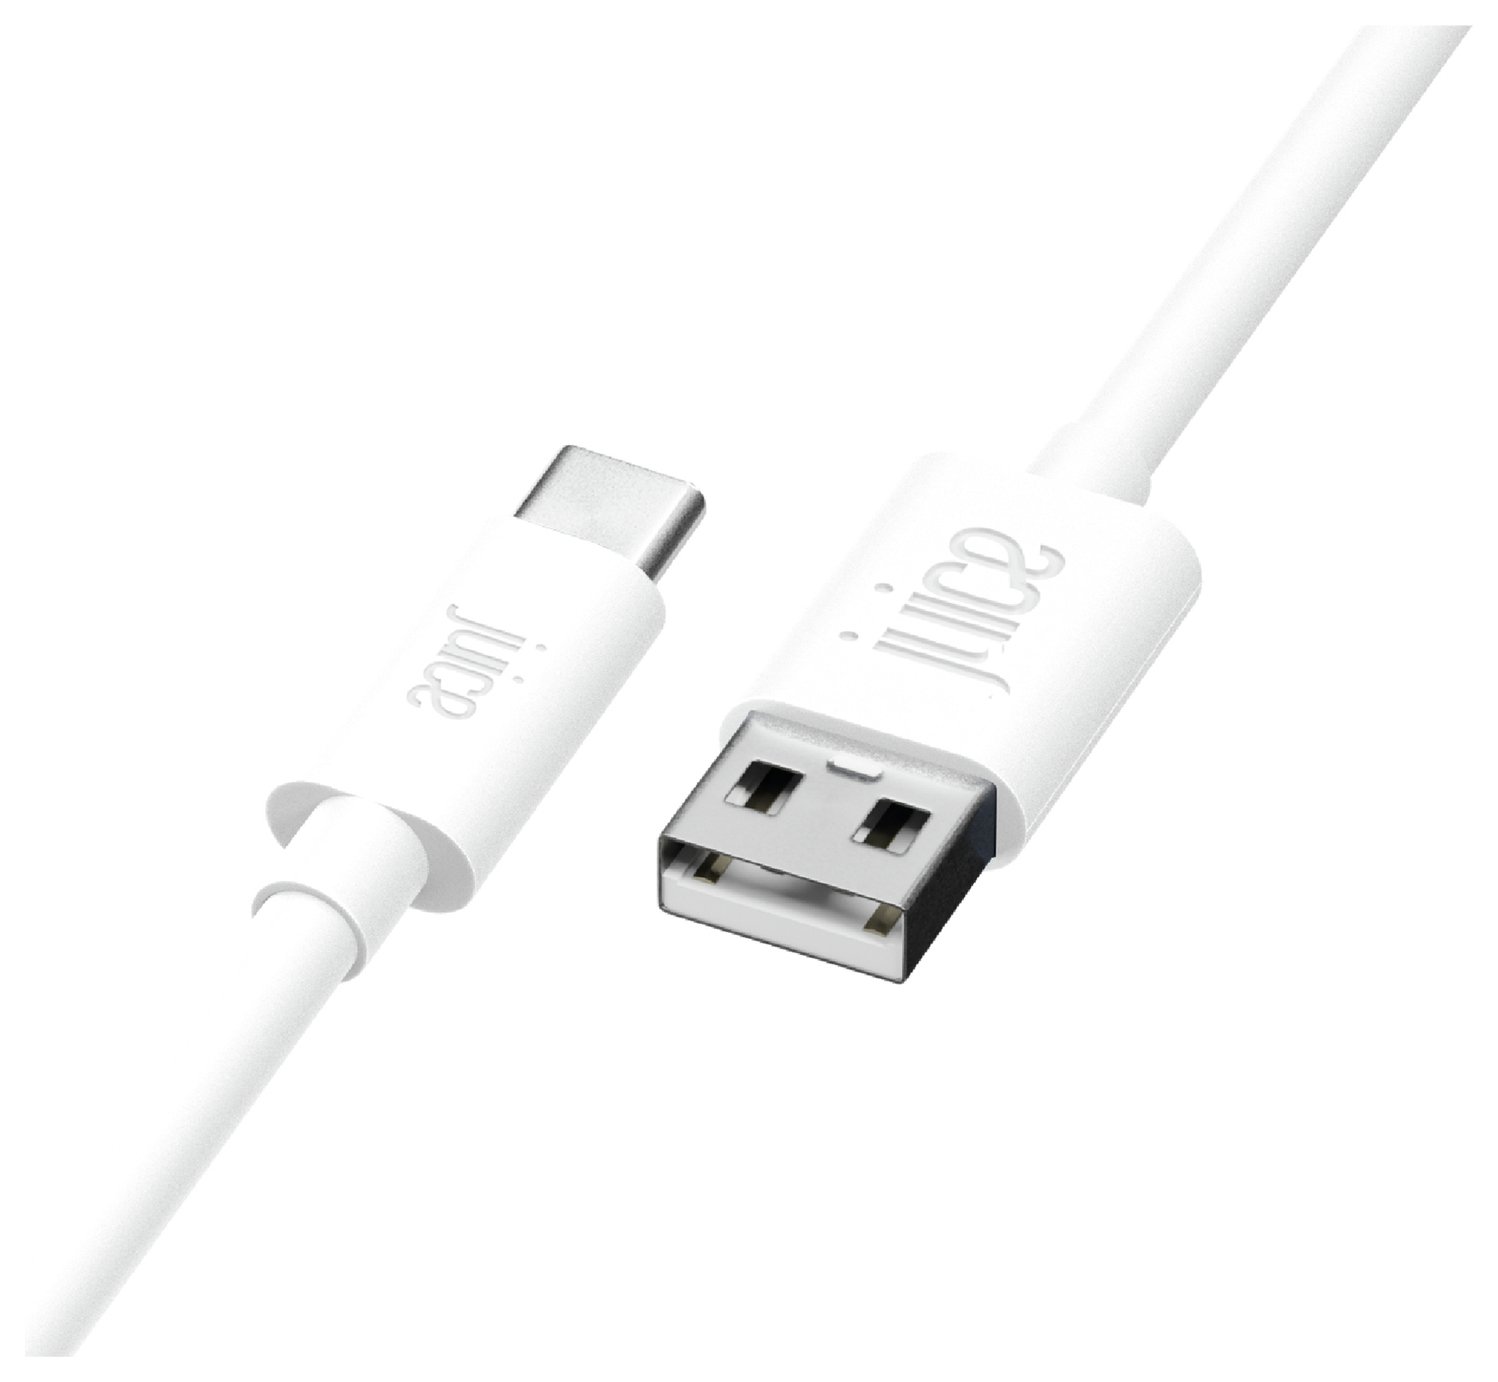 Juice USB to USB Type-C 2m Charging Cable Review